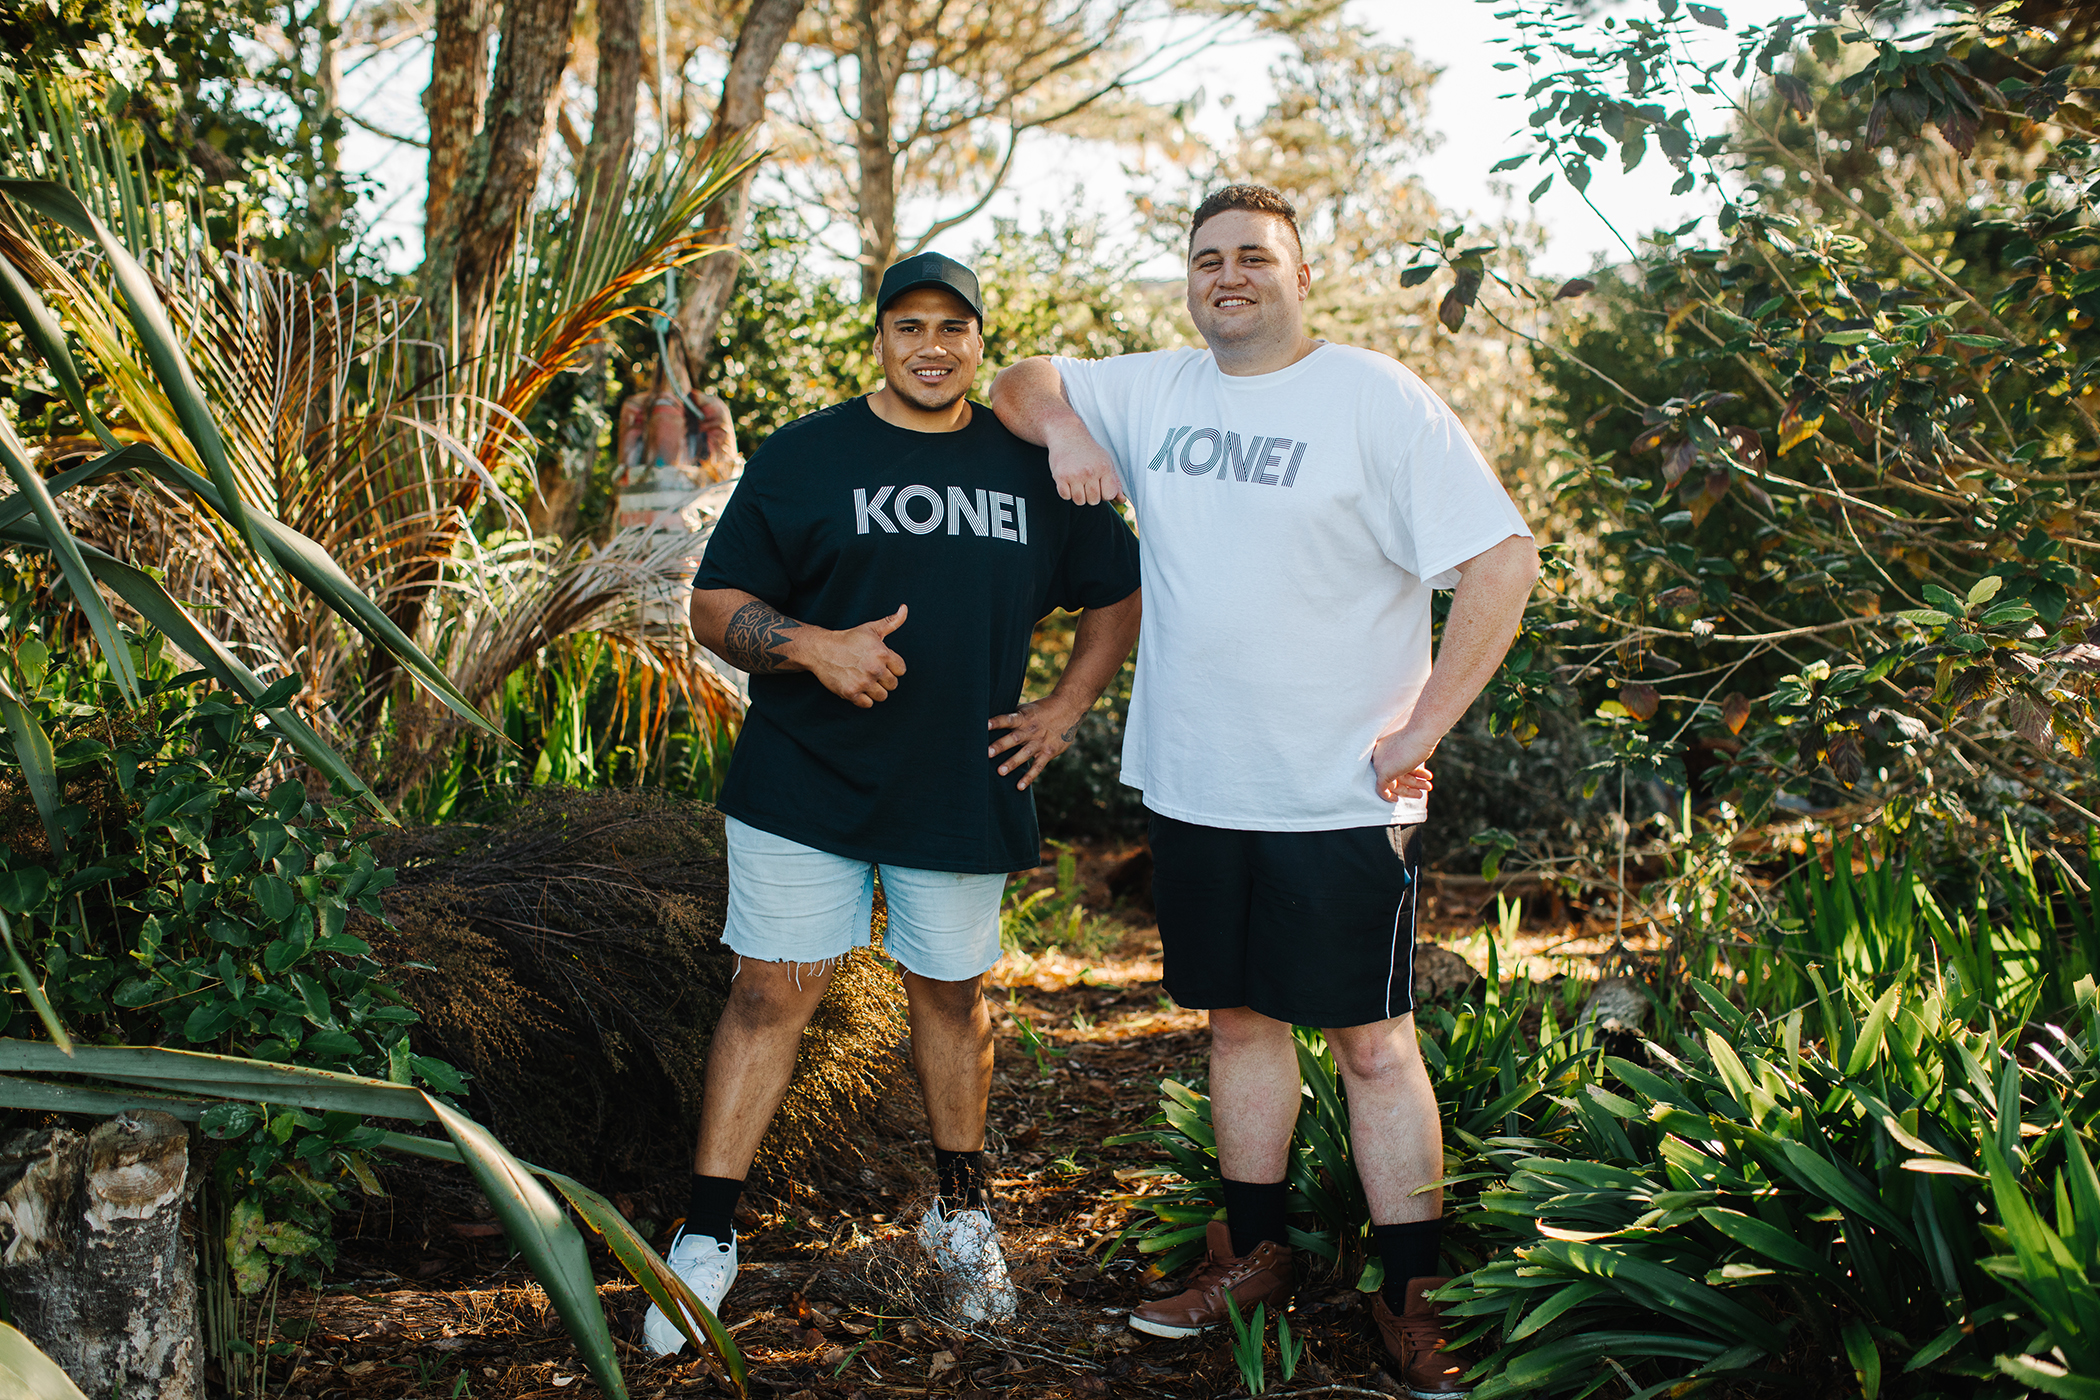 Konei builds and boosts Aotearoa brands and the entrepreneurs behind them.